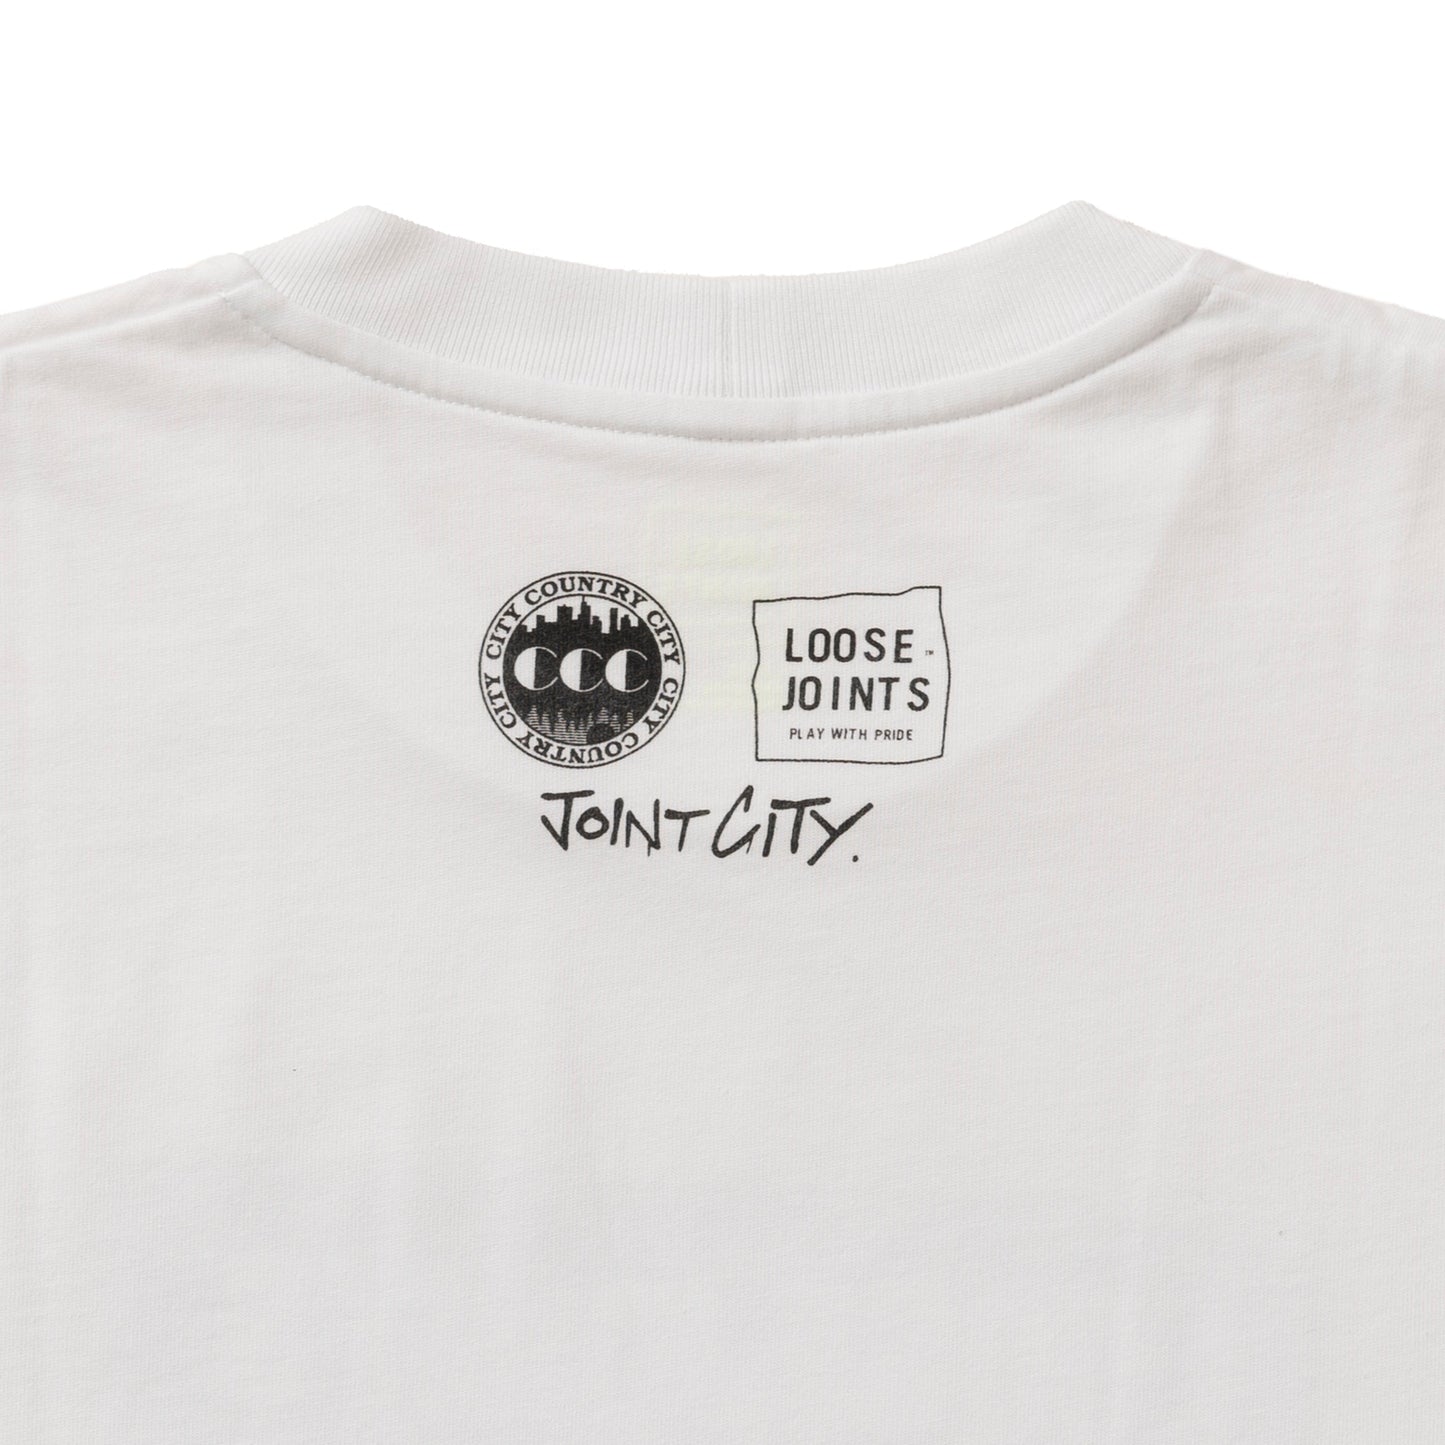 CITY COUNTRY CITY Joints City S/S TEE